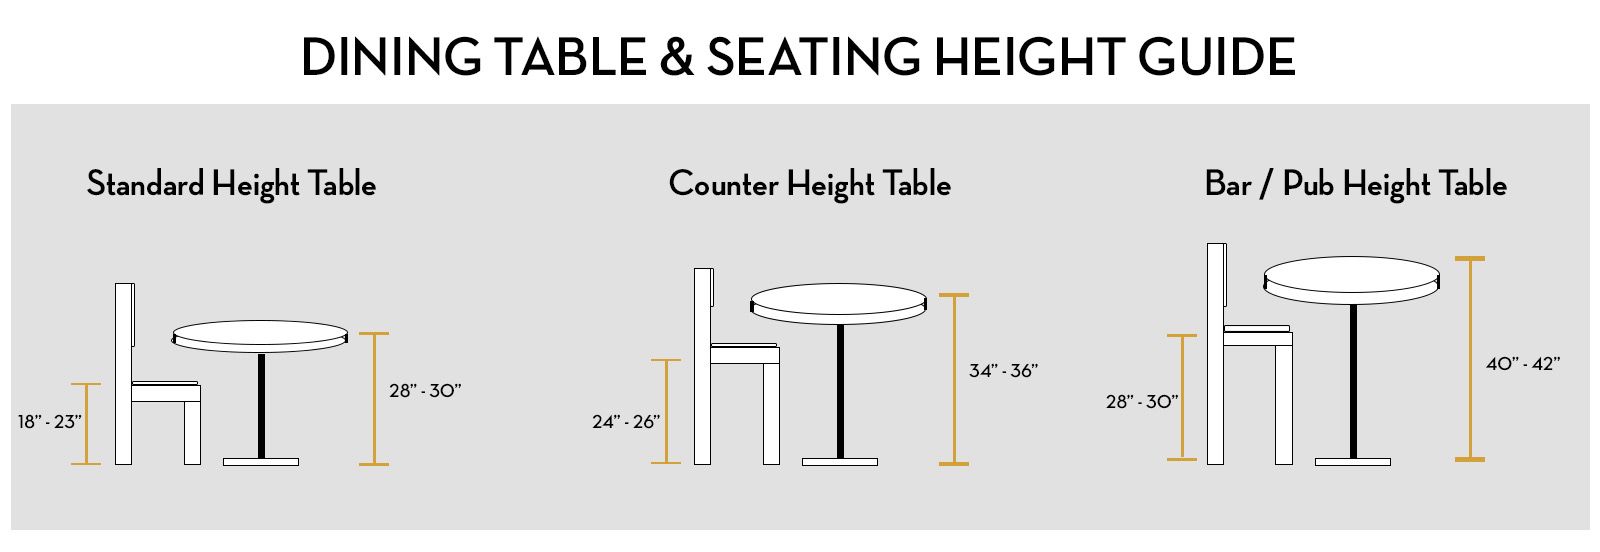 Standard Dining Table Dimensions: Guideline